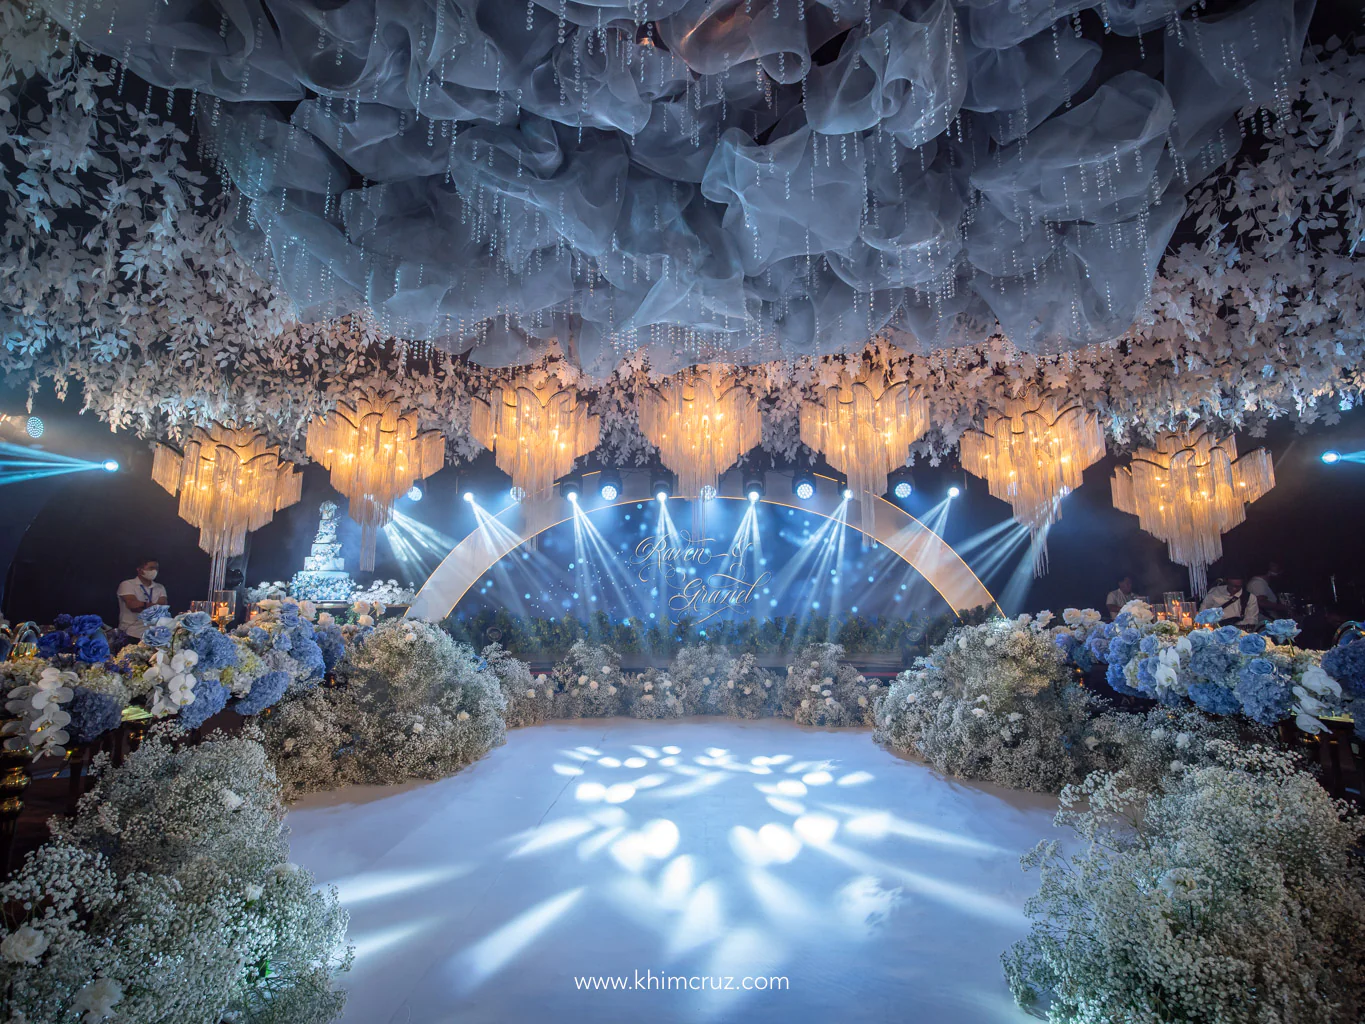 cloud ceiling installation above floral arrangements enclosing the dance floor with hanging chandeliers for a dreamy blue ethereal wedding designed by Khim Cruz